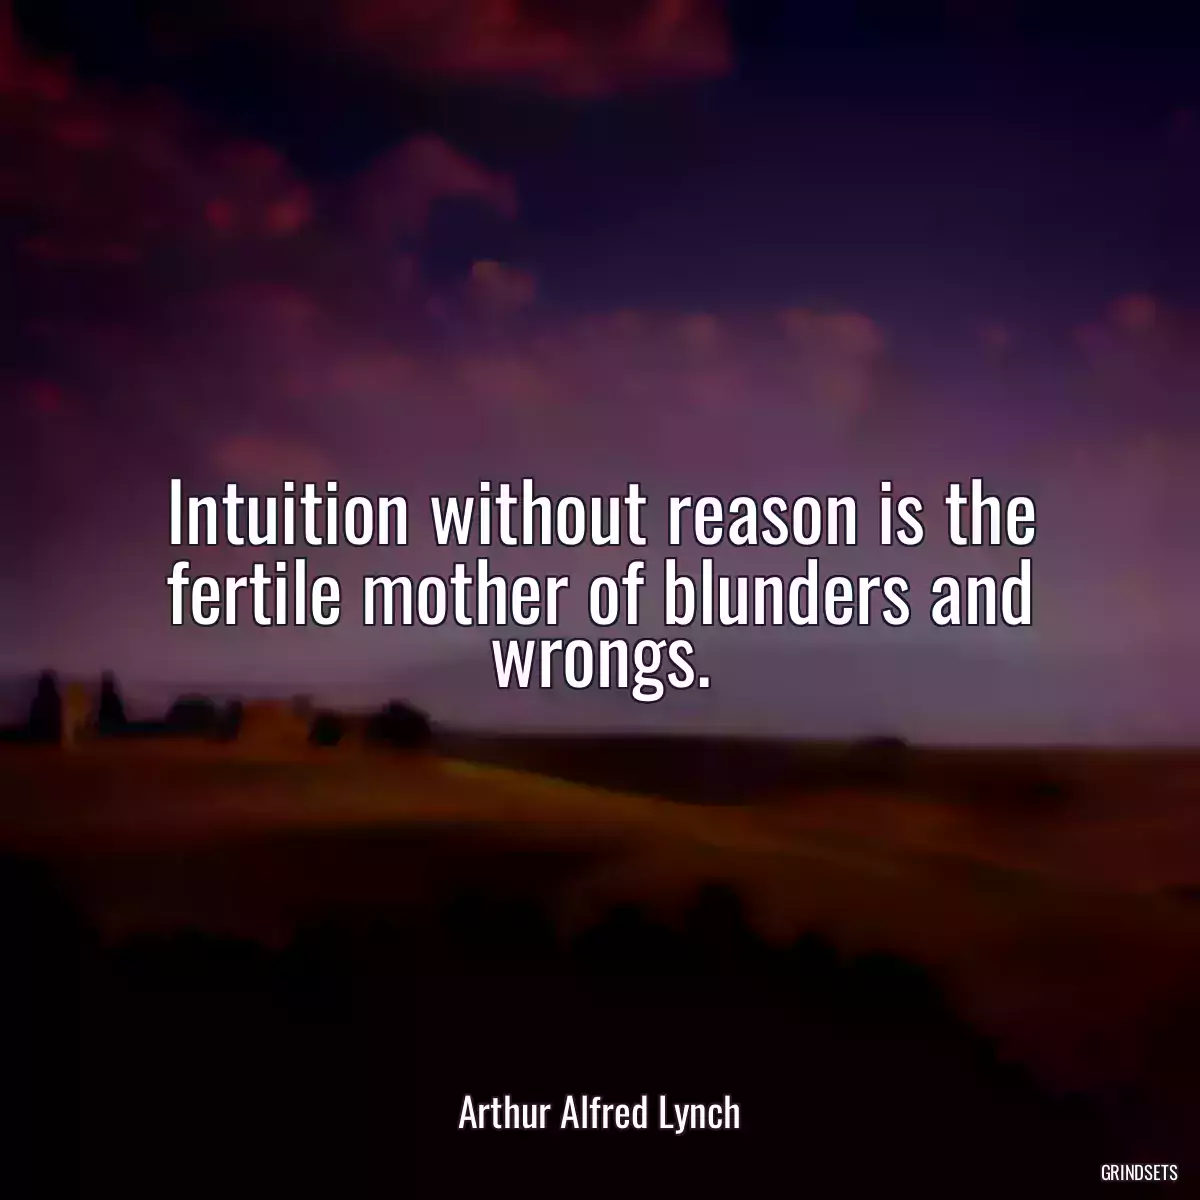 Intuition without reason is the fertile mother of blunders and wrongs.